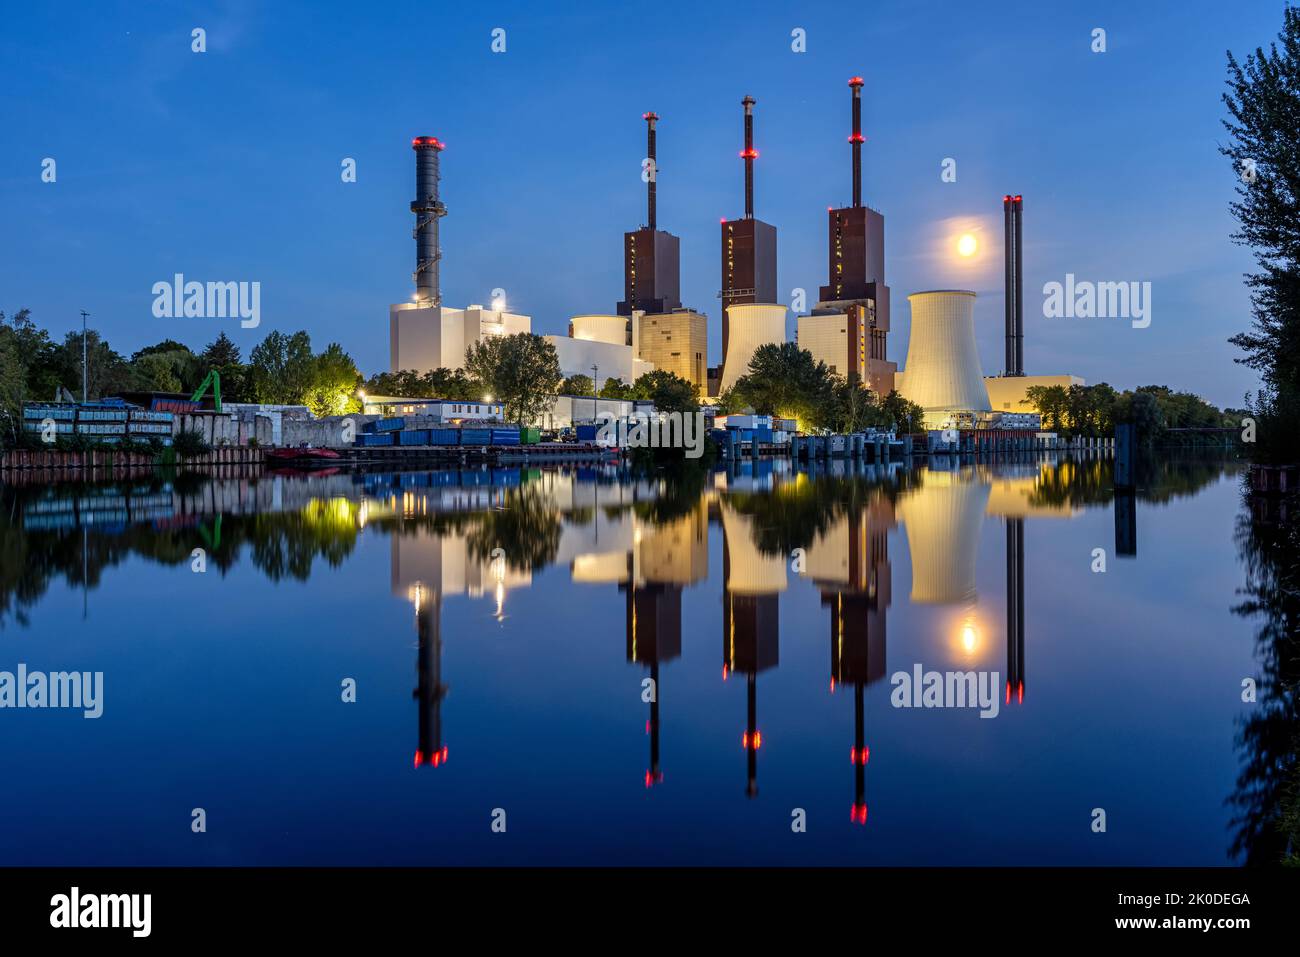 A power station in Berlin at night with a perfect reflection in the water Stock Photo